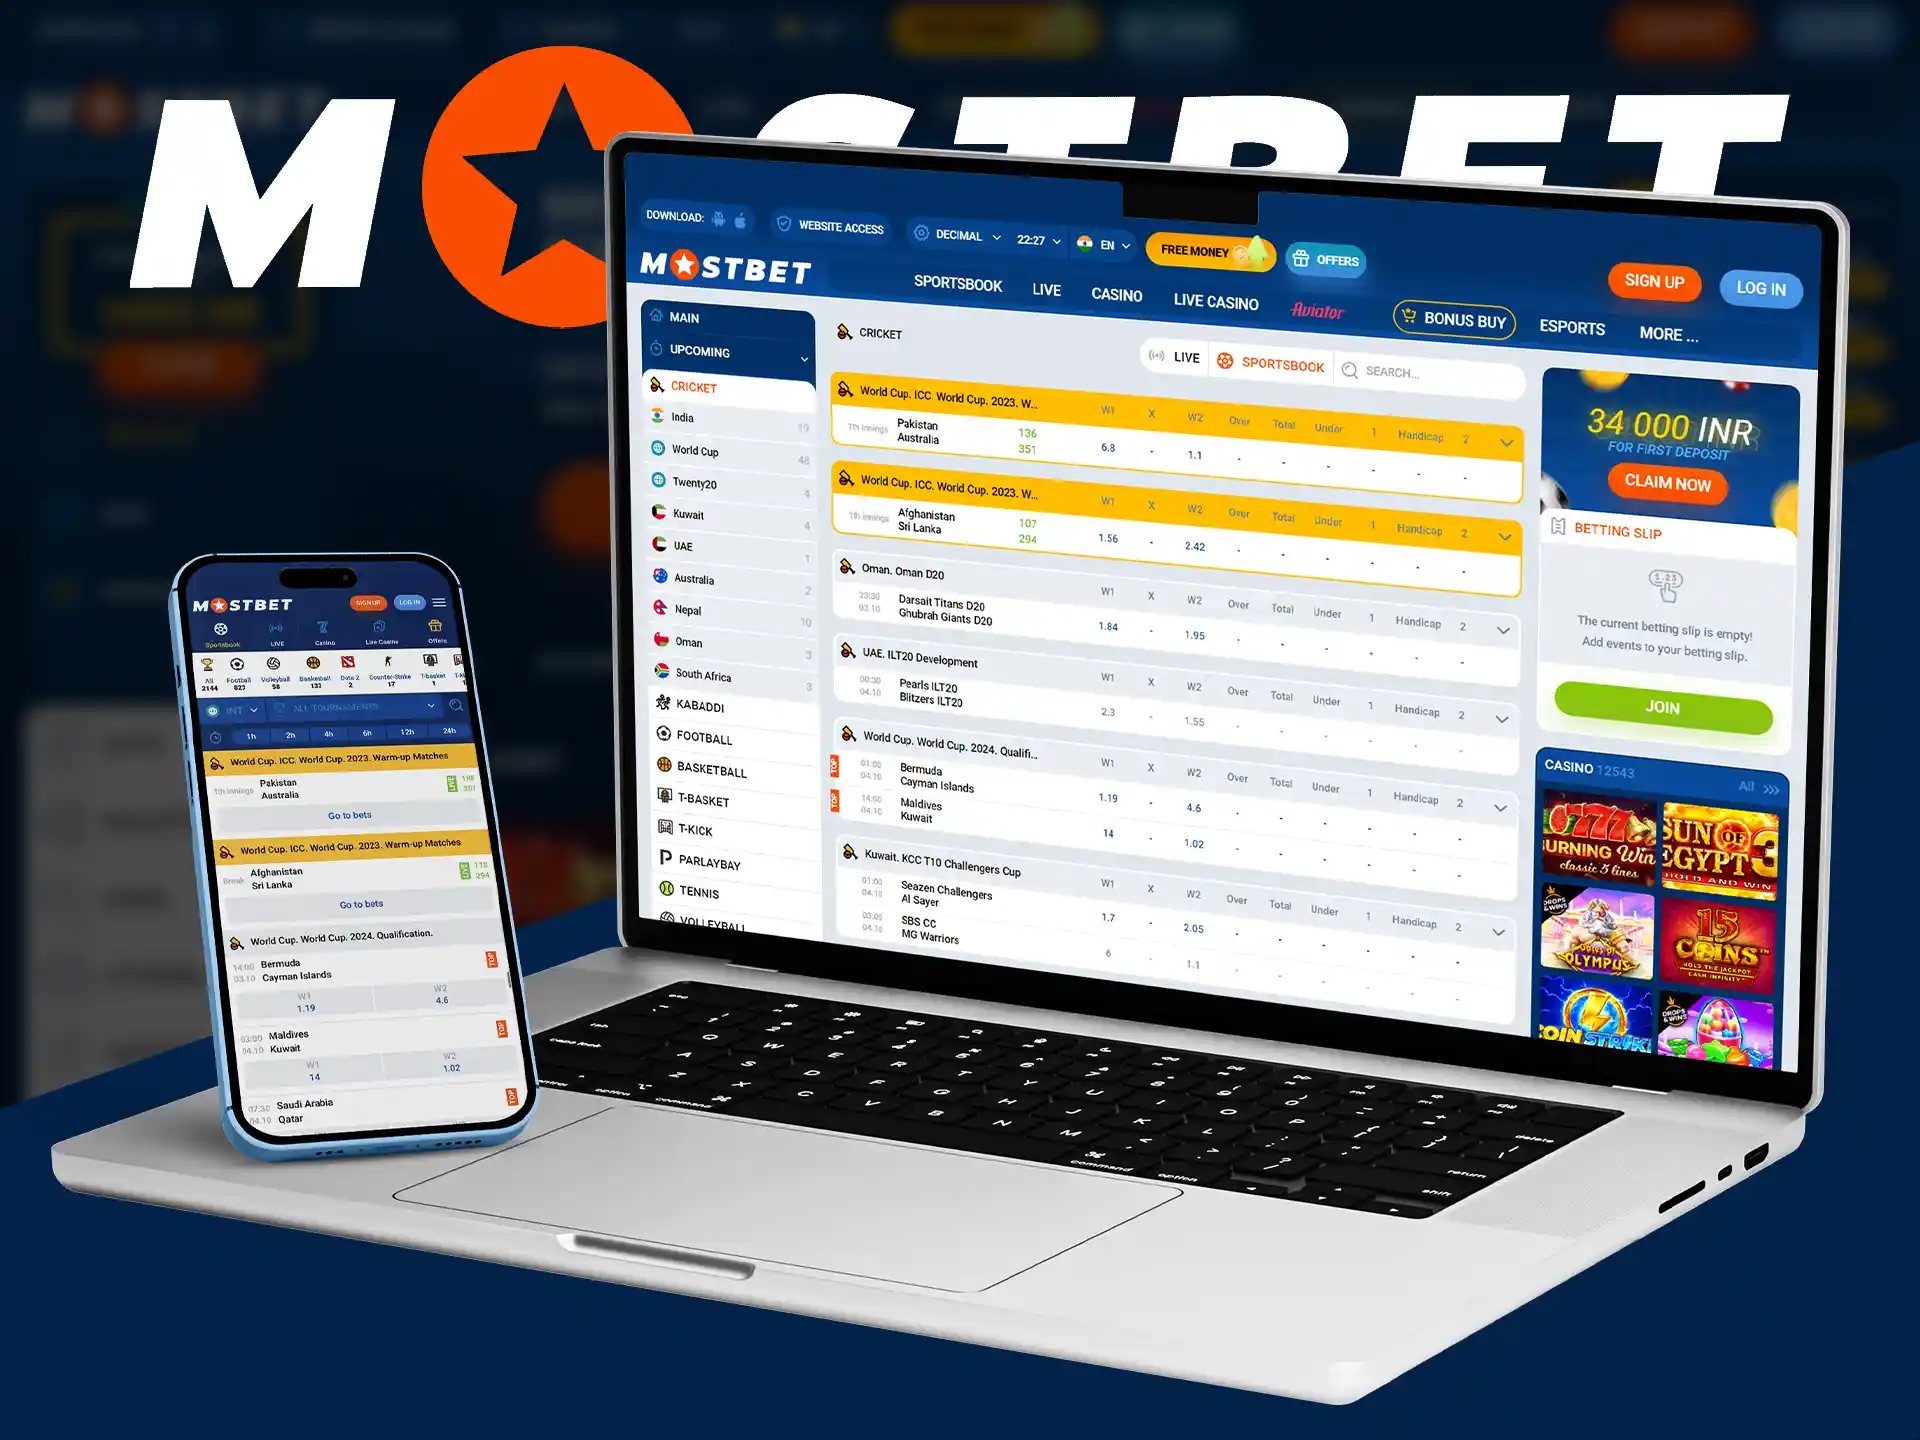 Mostbet creates all conditions for betting on sports, including cricket.